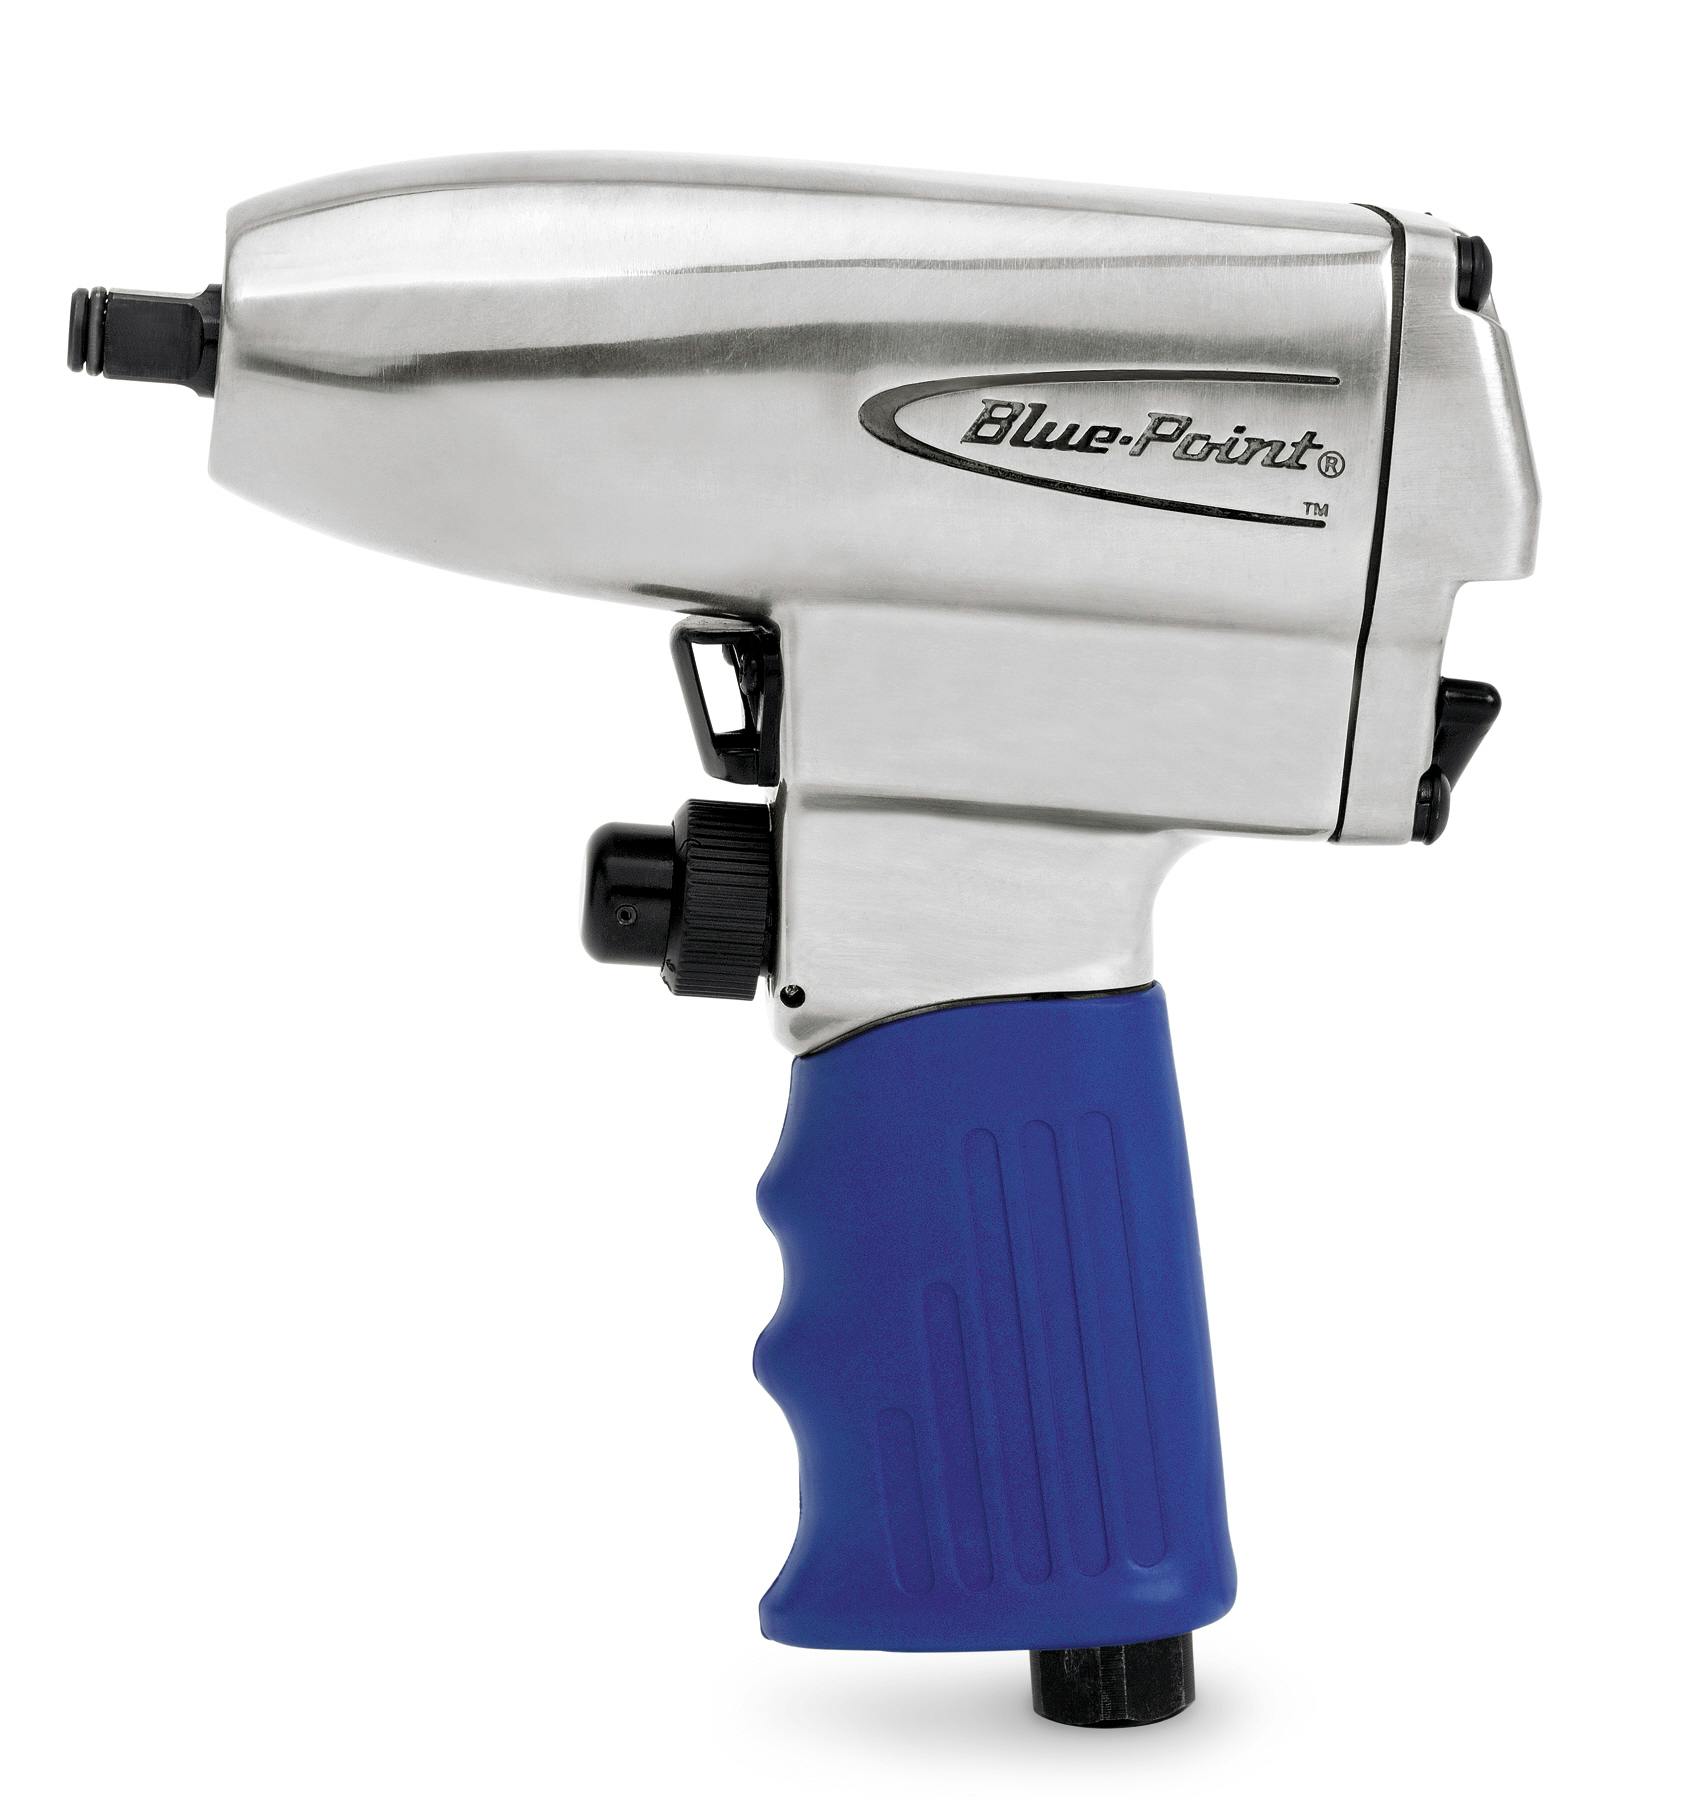 Blue point AT5500 1/2" Drive Air Impact Wrench Gun Protective Boot 